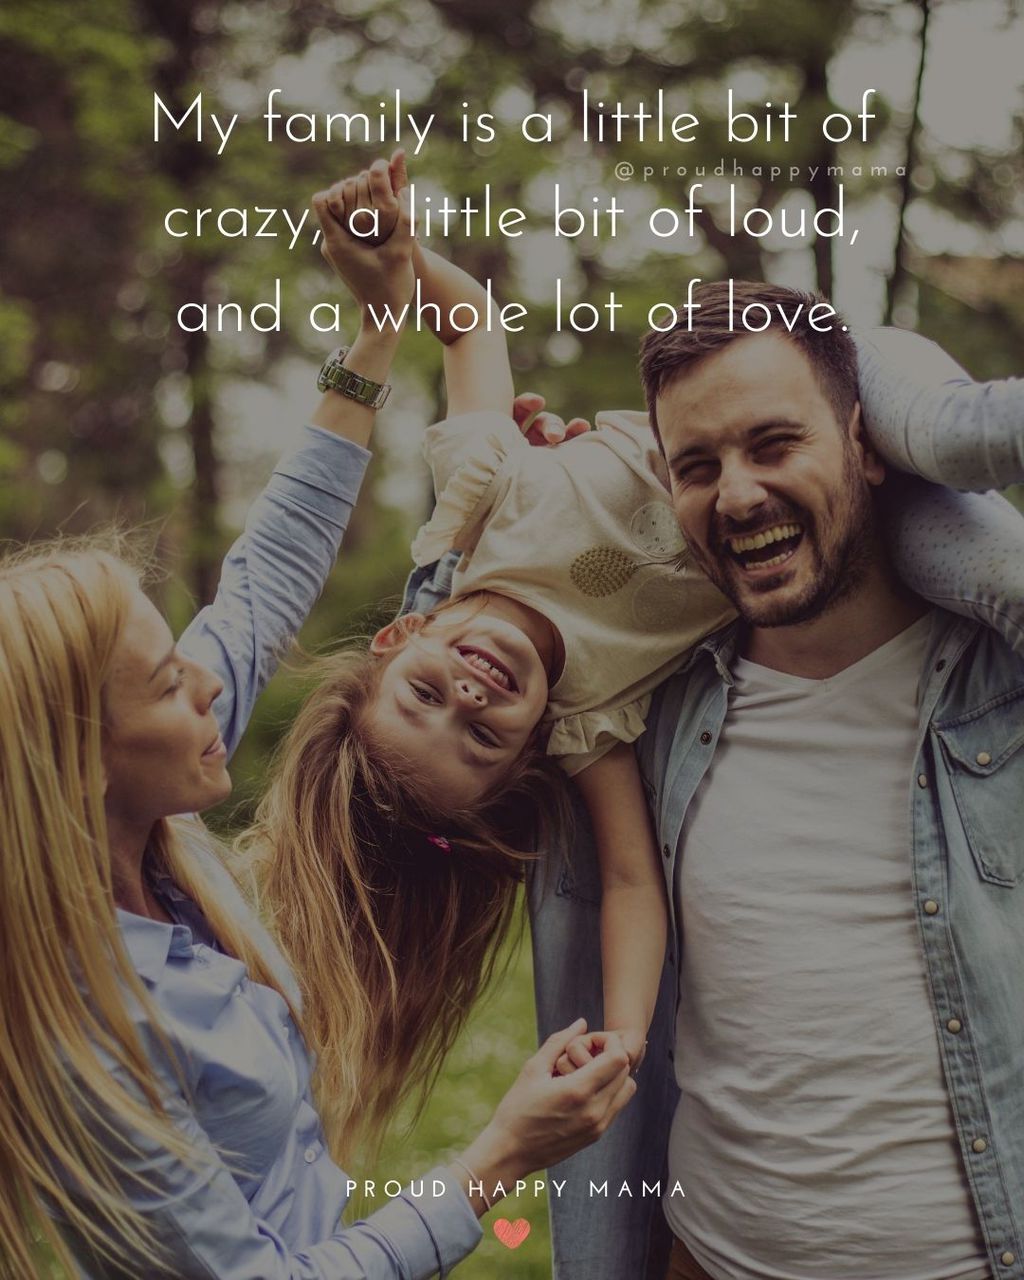 Quotes Family | My family is a little bit of crazy, a little bit of loud, and a whole lot of love.